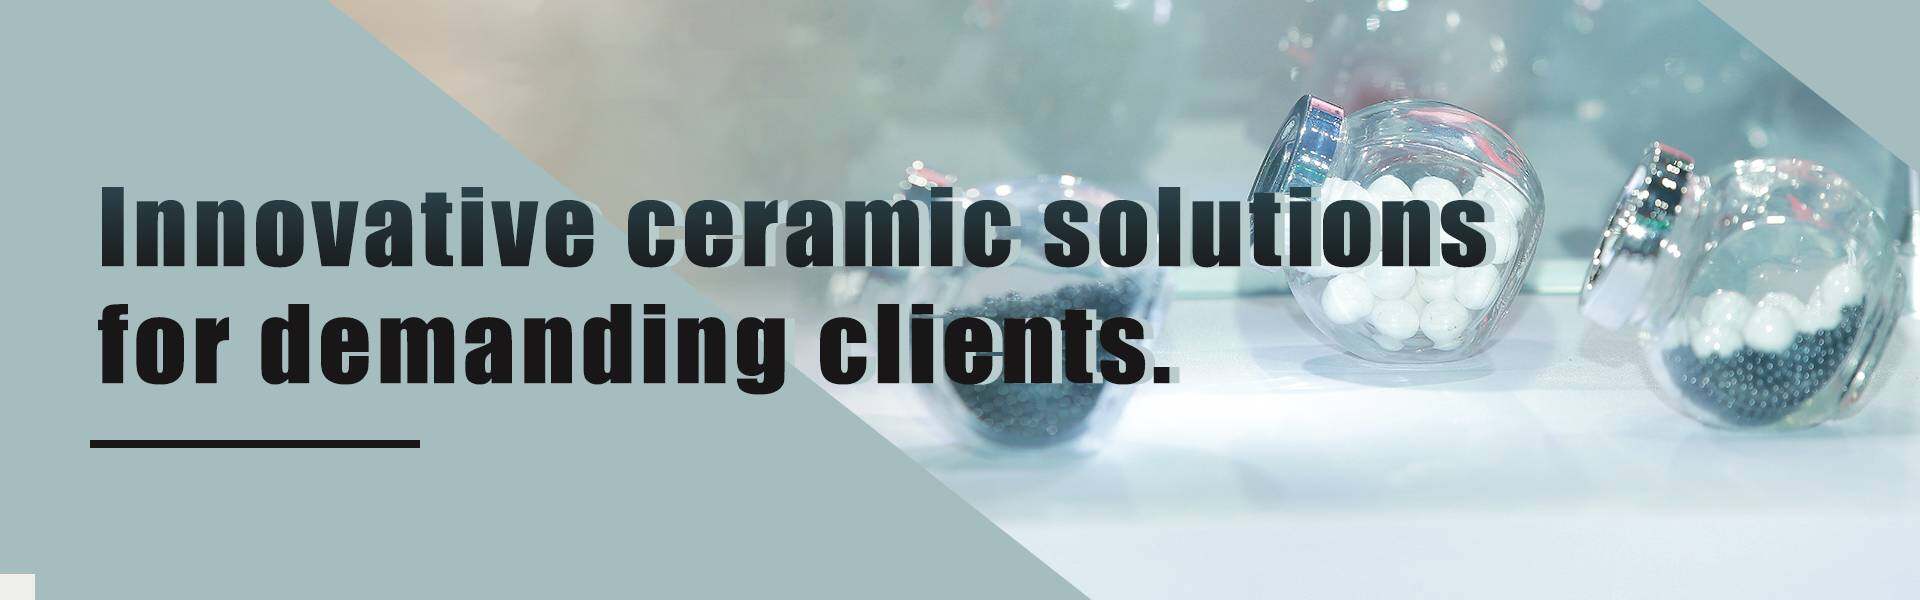 Introduction - solutions - CERAMIC-SOLUTIONS